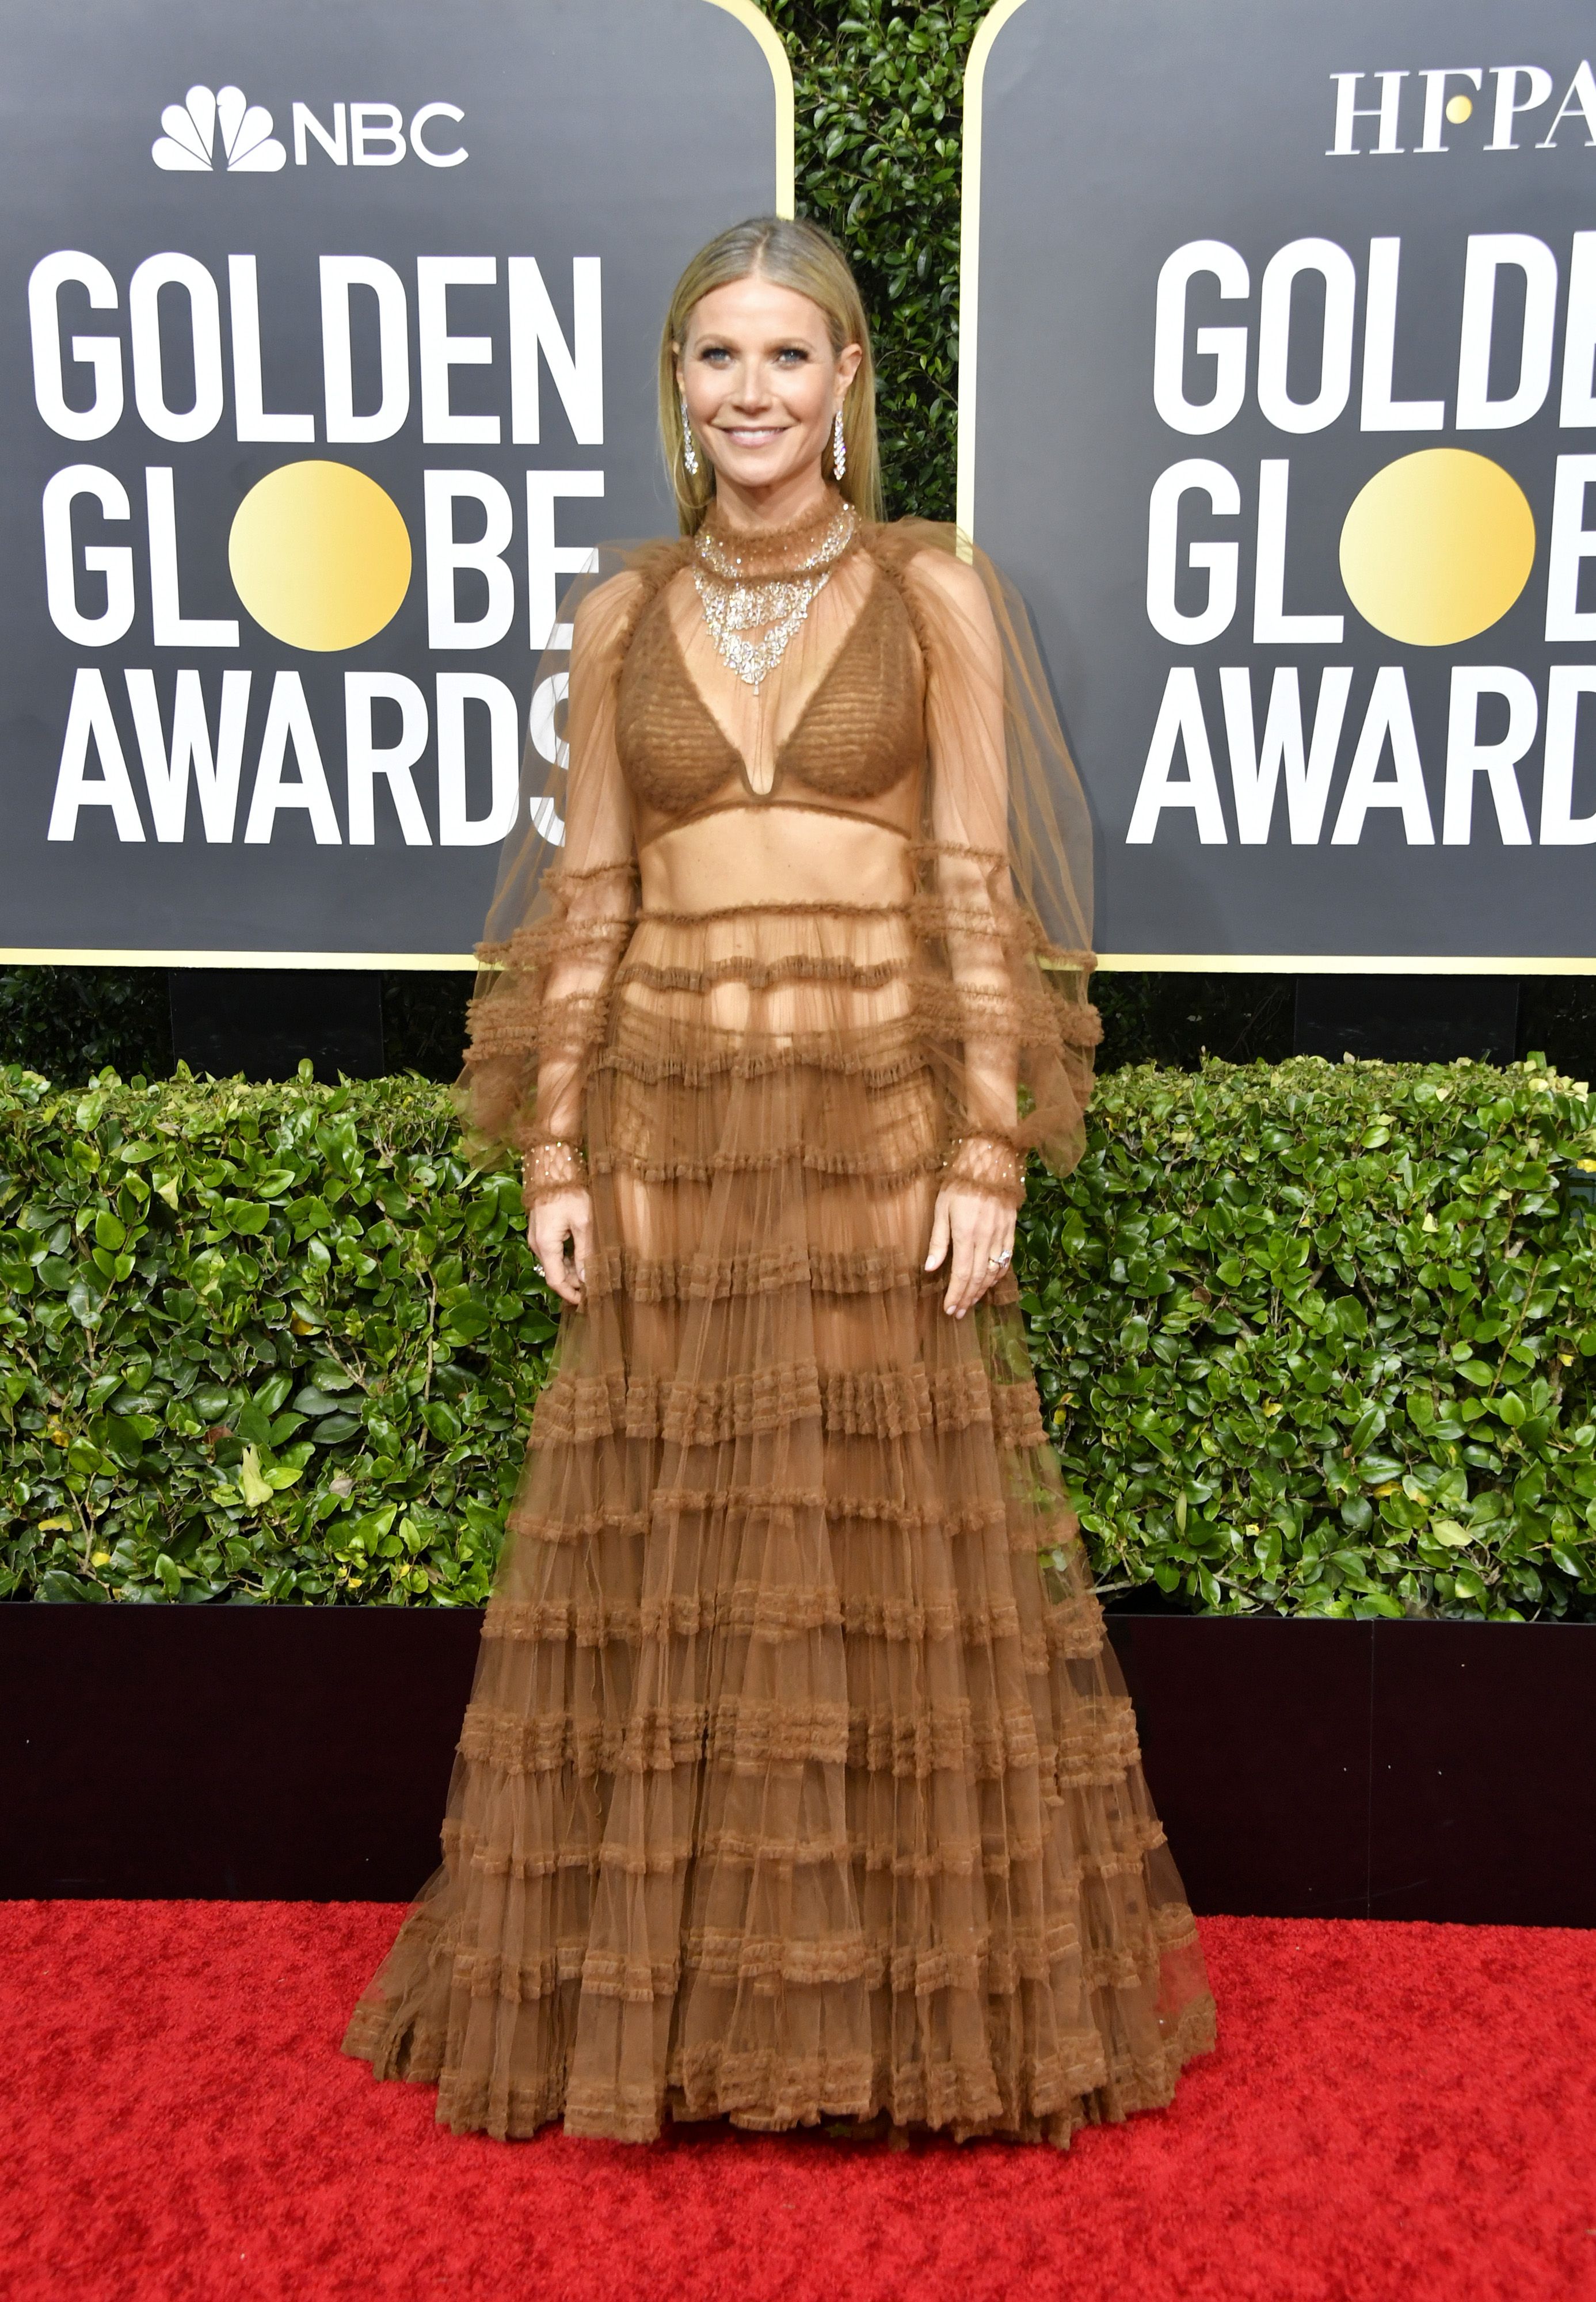 Gwyneth Paltrow Wears a Sheer Gown at the 2020 Golden Globes